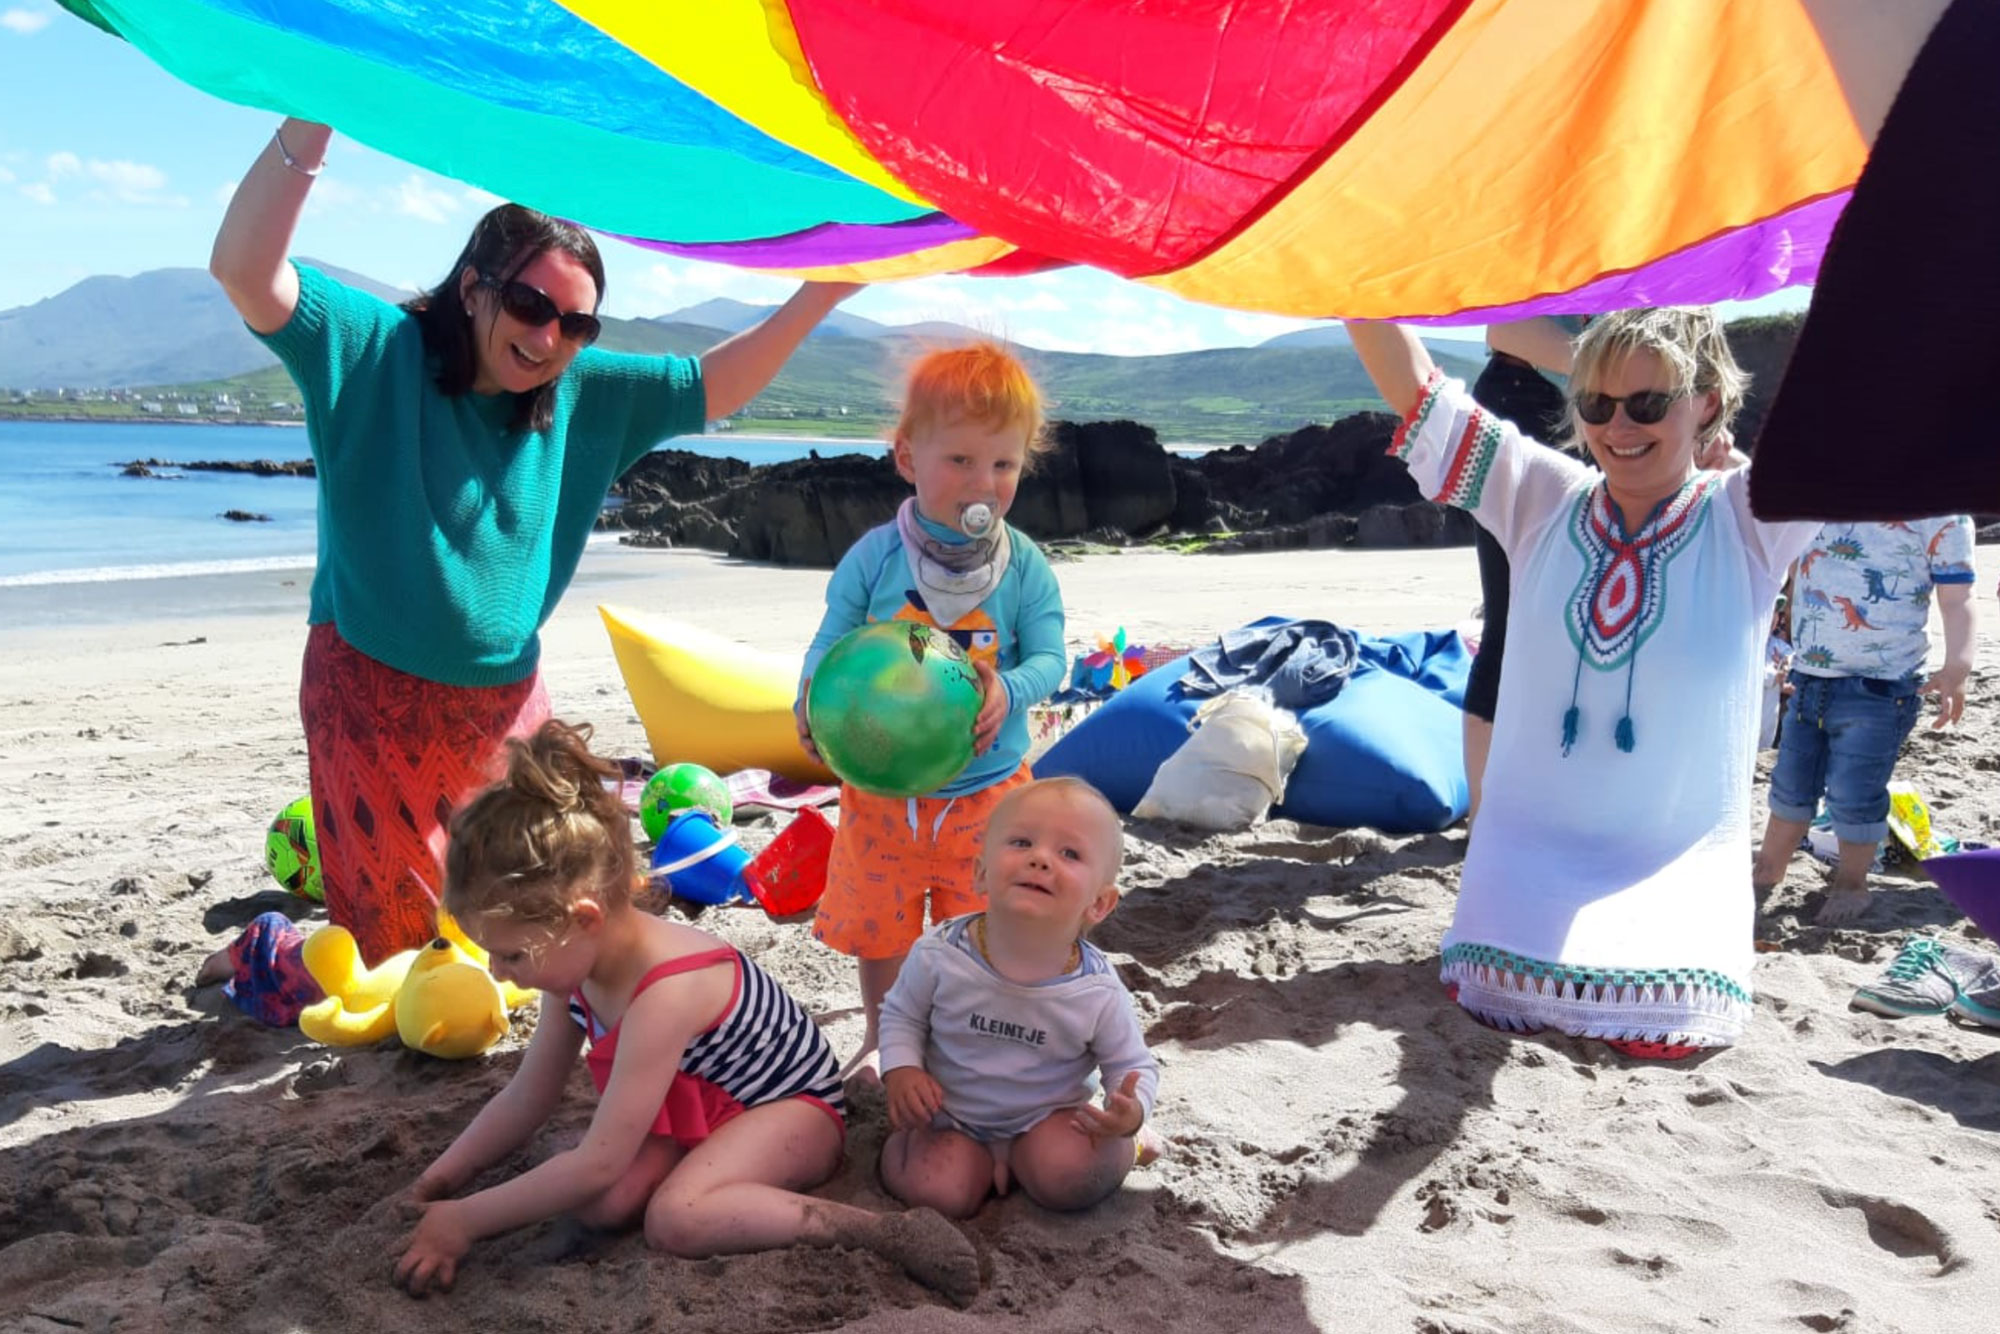 Two women holding a blanket on the beach with two infants playing underneath/Beirt bhan ag imirt le naíonáin.